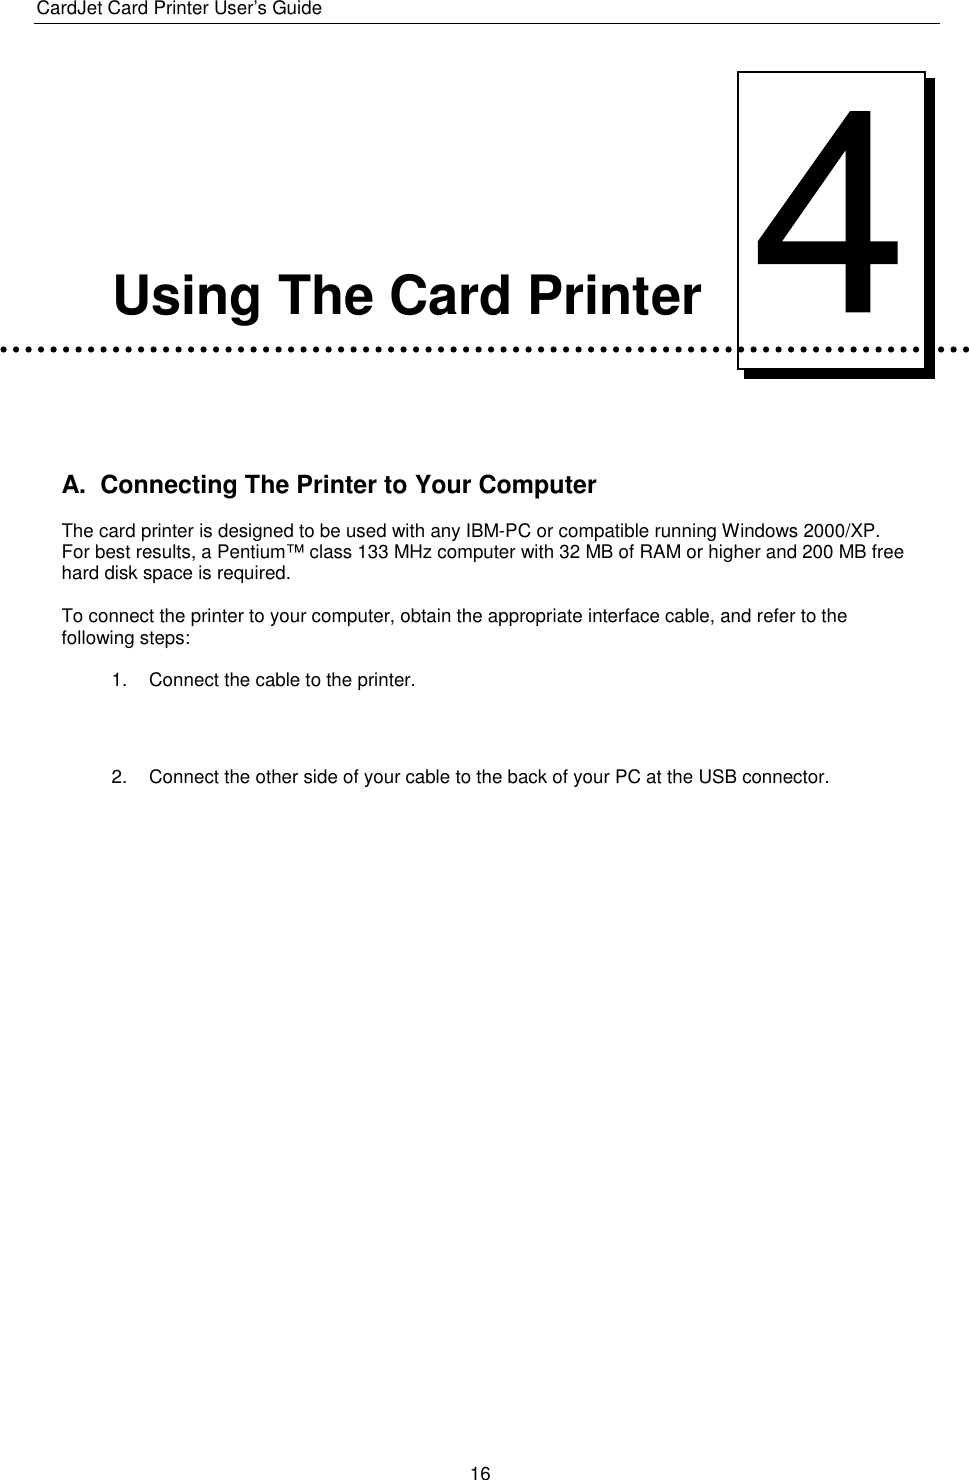 CardJet Card Printer User’s Guide  16      Using The Card Printer   A.  Connecting The Printer to Your Computer The card printer is designed to be used with any IBM-PC or compatible running Windows 2000/XP. For best results, a Pentium™ class 133 MHz computer with 32 MB of RAM or higher and 200 MB free hard disk space is required. To connect the printer to your computer, obtain the appropriate interface cable, and refer to the following steps: 1.  Connect the cable to the printer.   2.  Connect the other side of your cable to the back of your PC at the USB connector. 